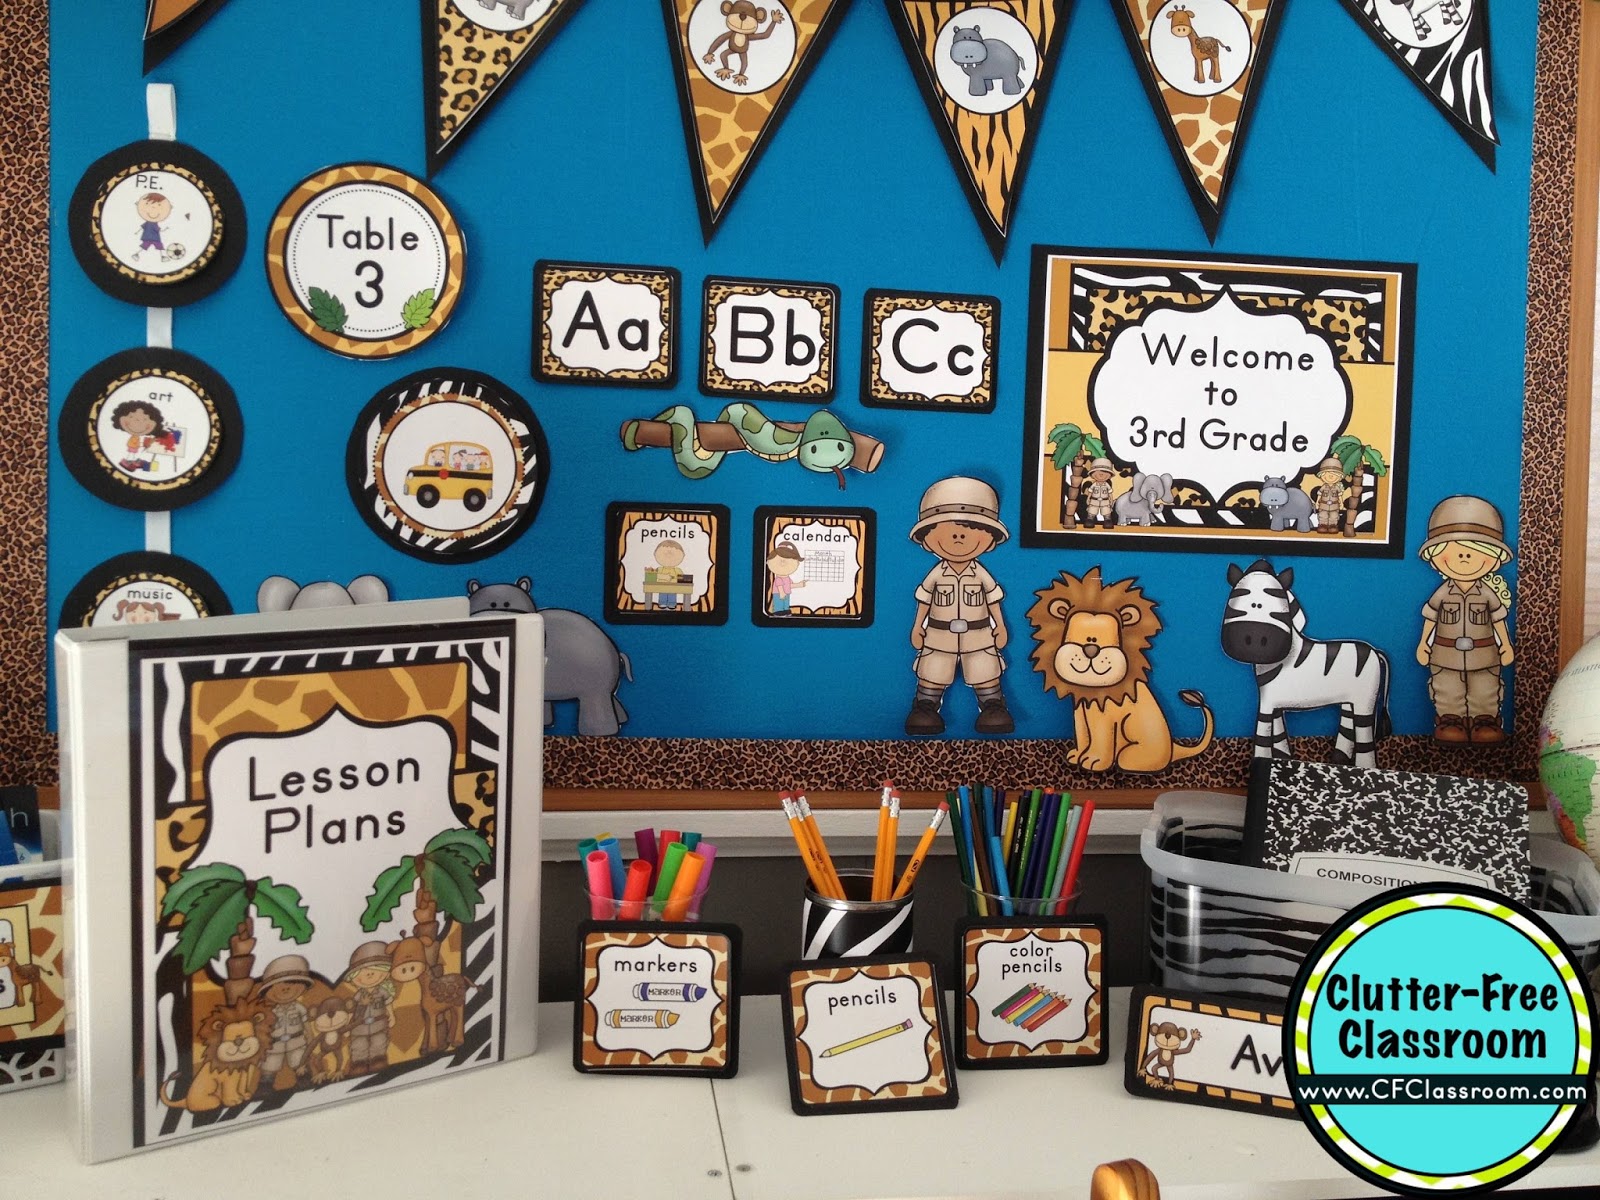 Are you planning a Jungle Safari themed classroom or thematic unit? This blog post provides great decoration tips and ideas for the best Jungle Safari theme yet! It has photos, ideas, supplies & printable classroom decor to will make set up easy and affordable. You can create a Jungle Safari theme on a budget!